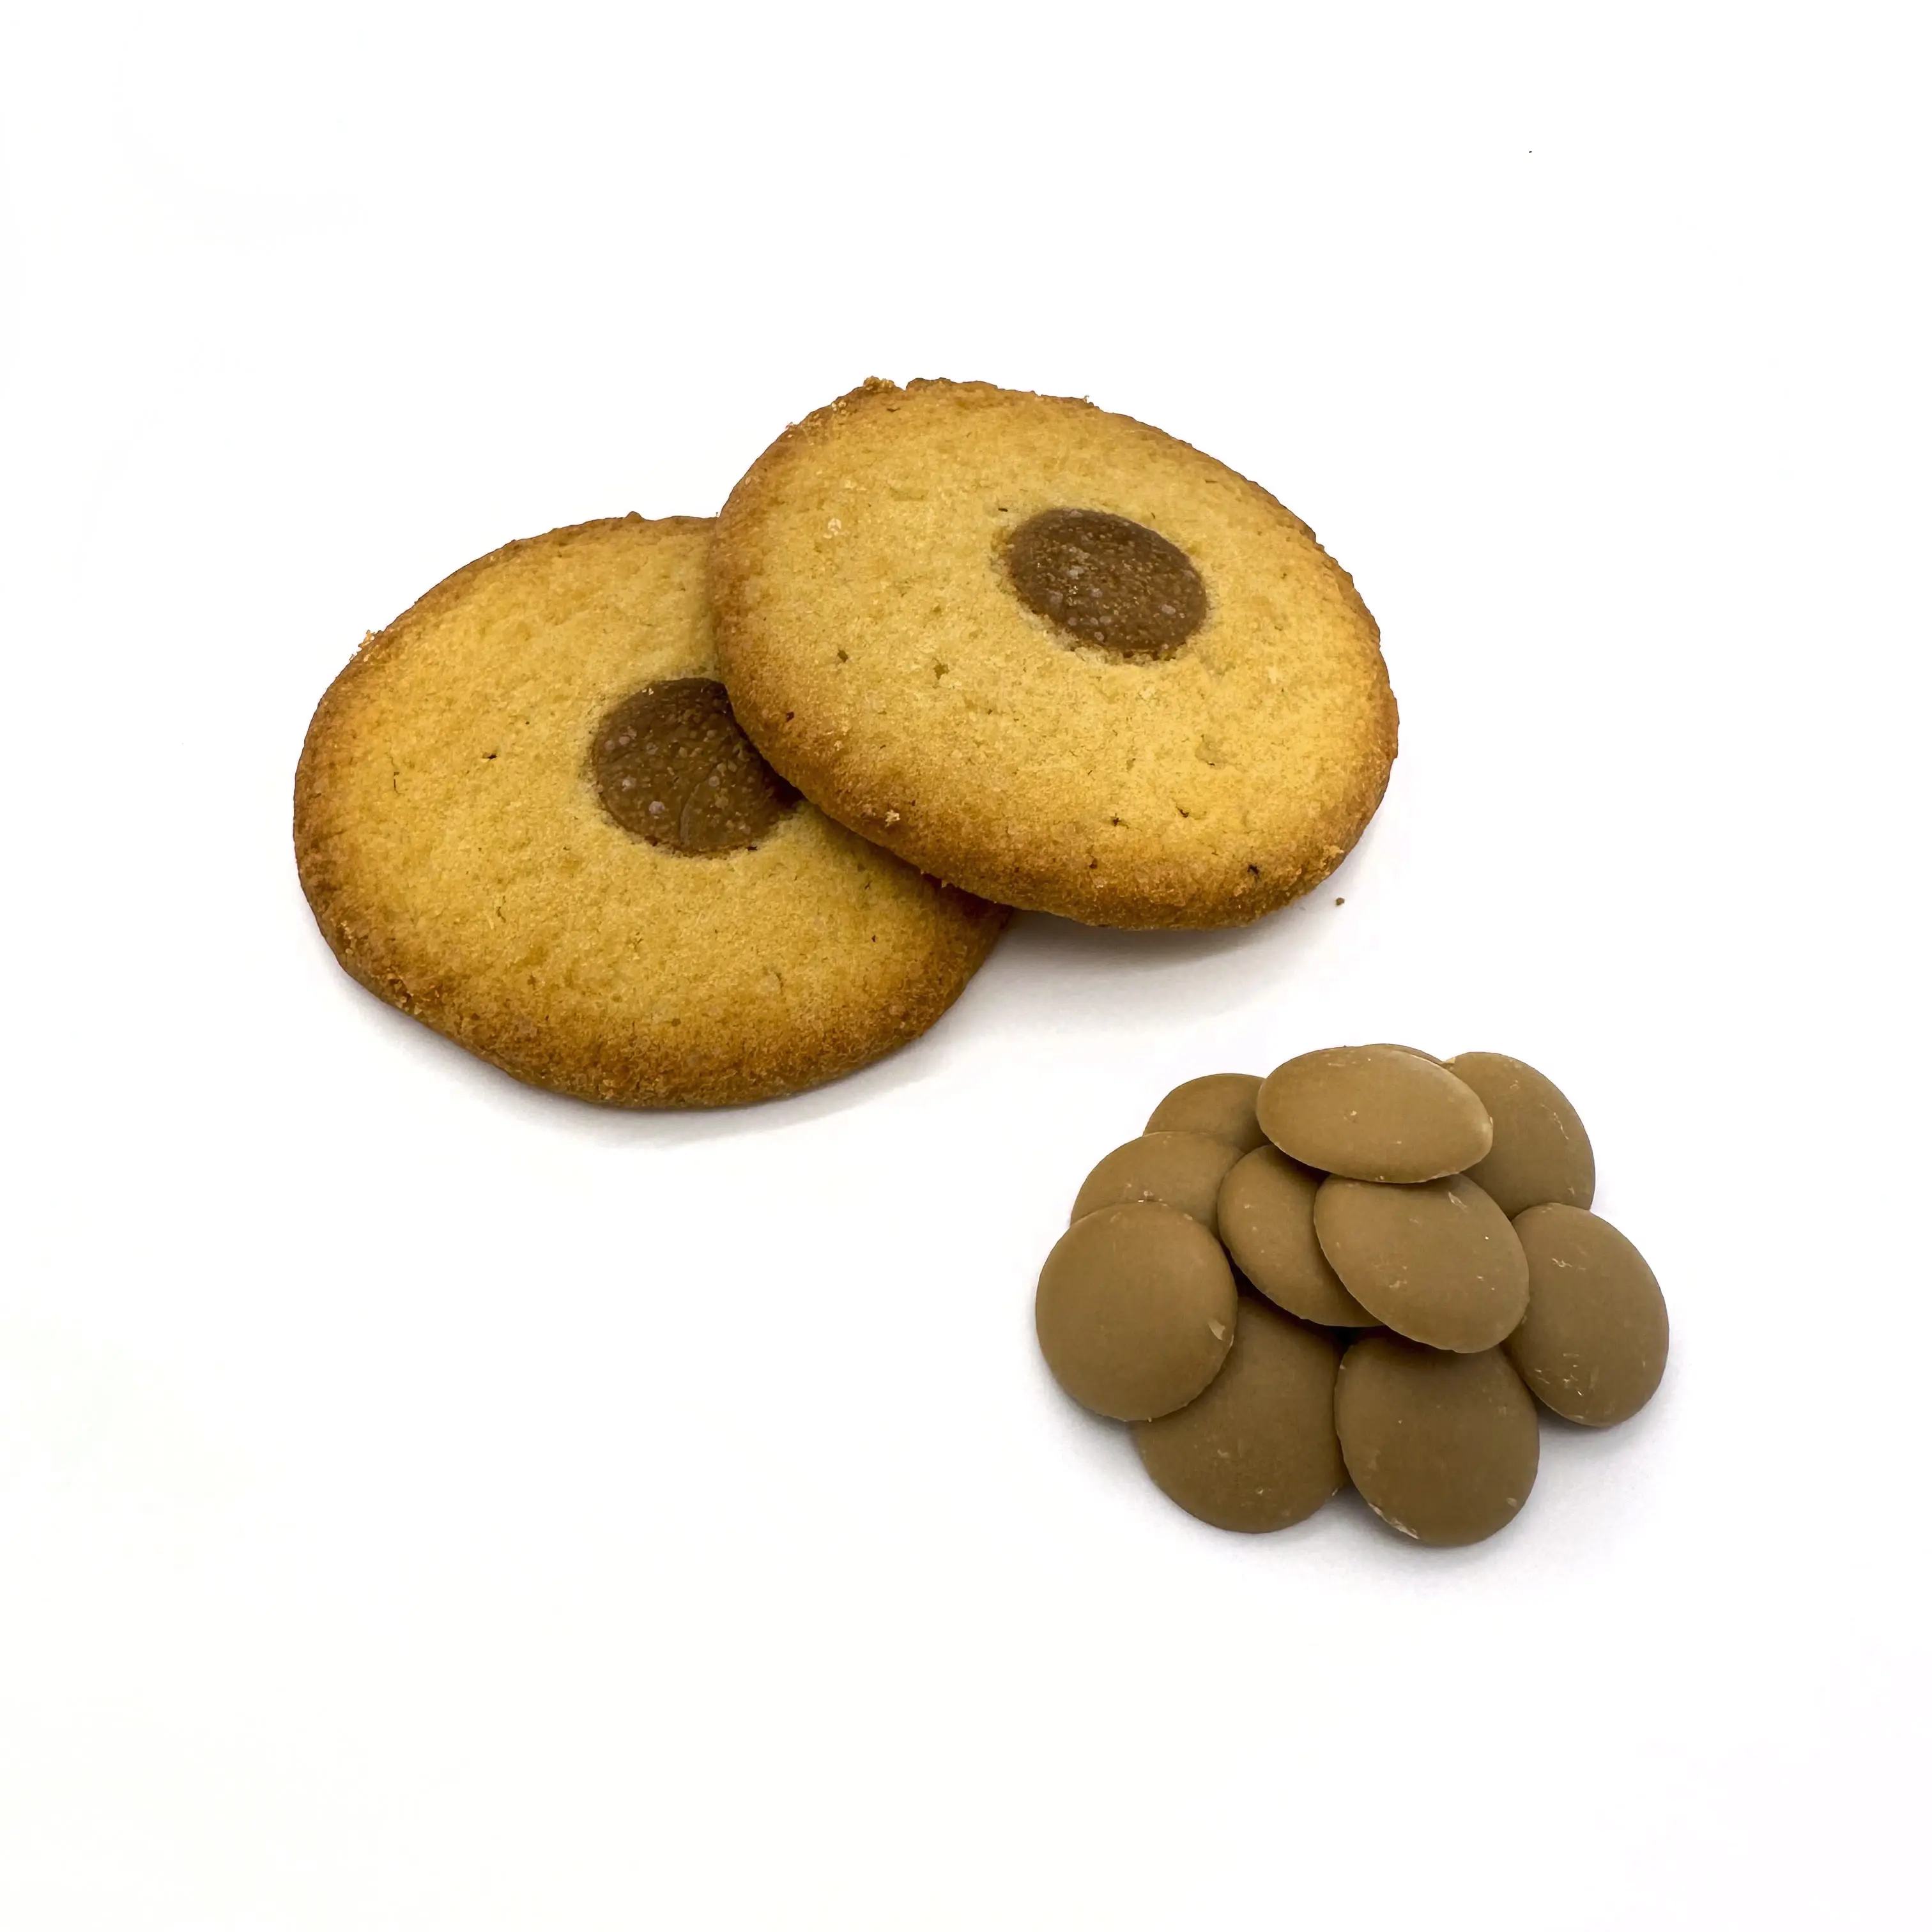 High quality handmade Italian biscuits - soft and crumbly texture - Shortbread Cookies with caramel Butter Biscuits